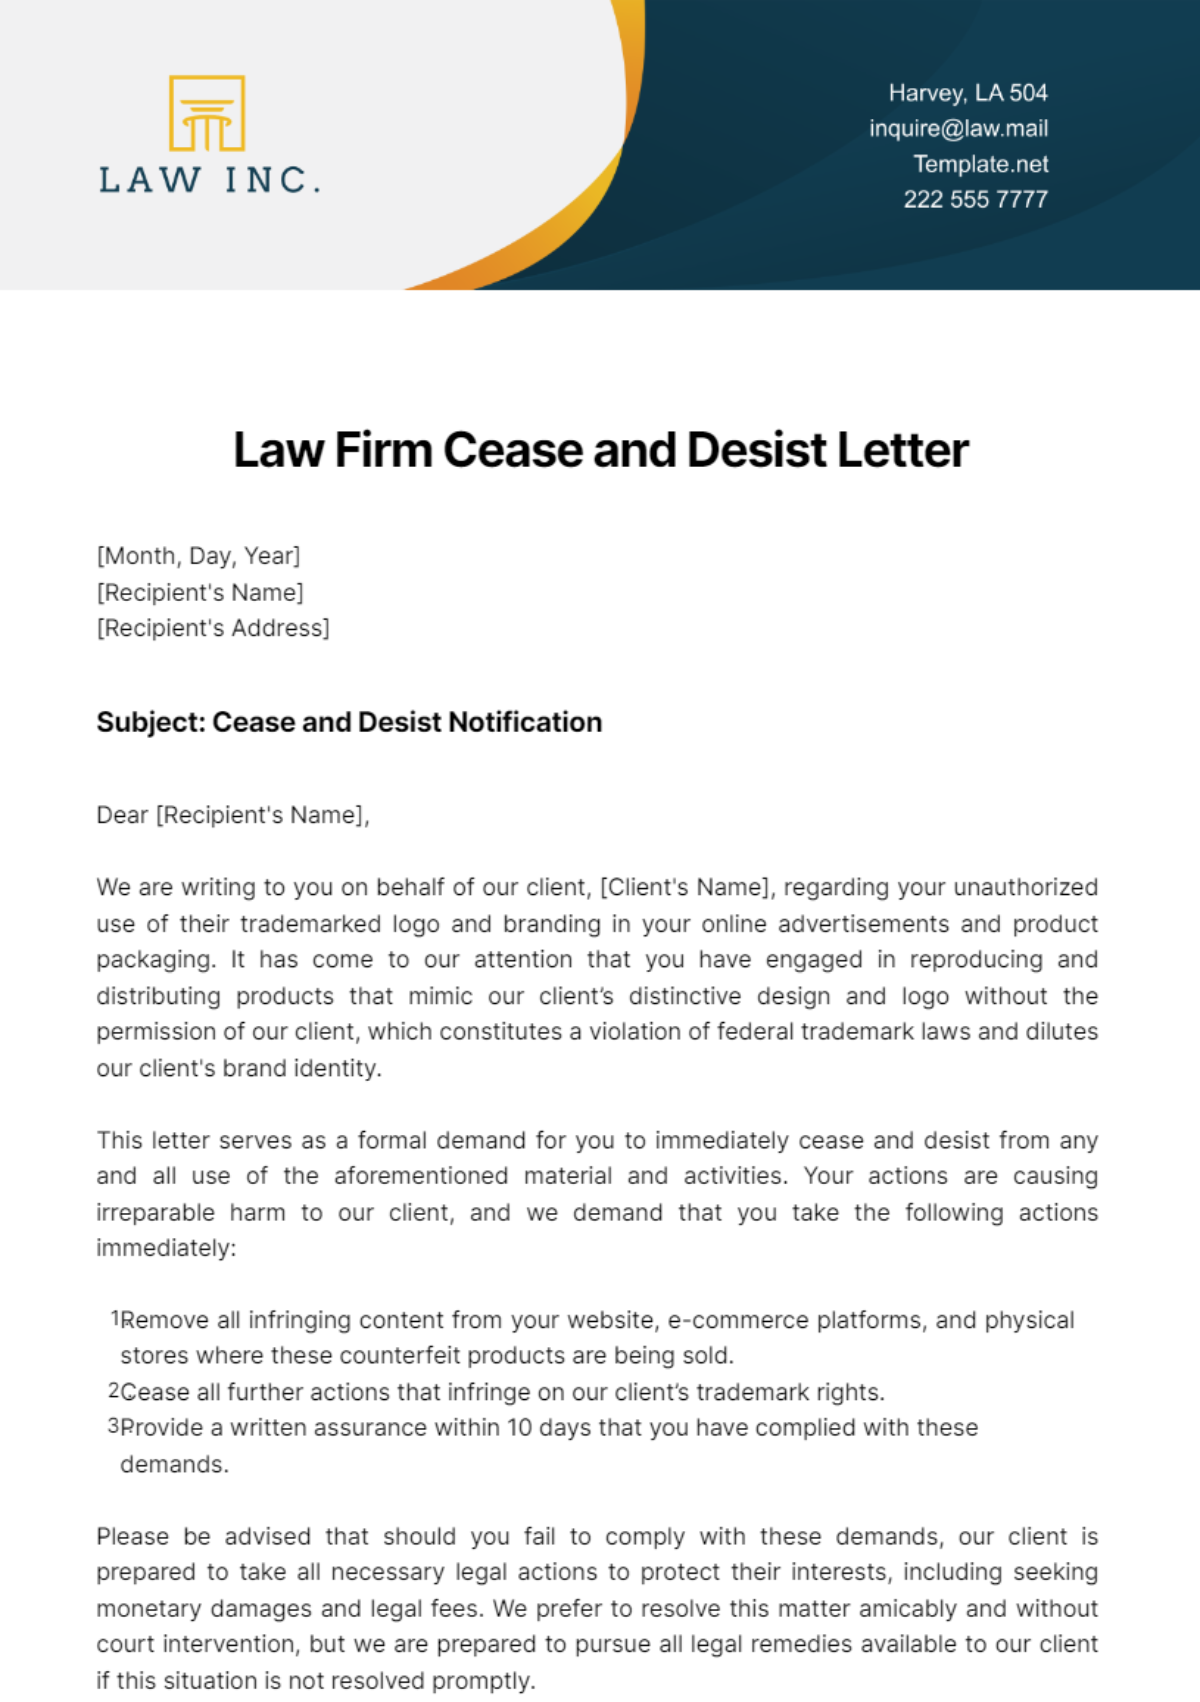 Law Firm Cease and Desist Letter Template